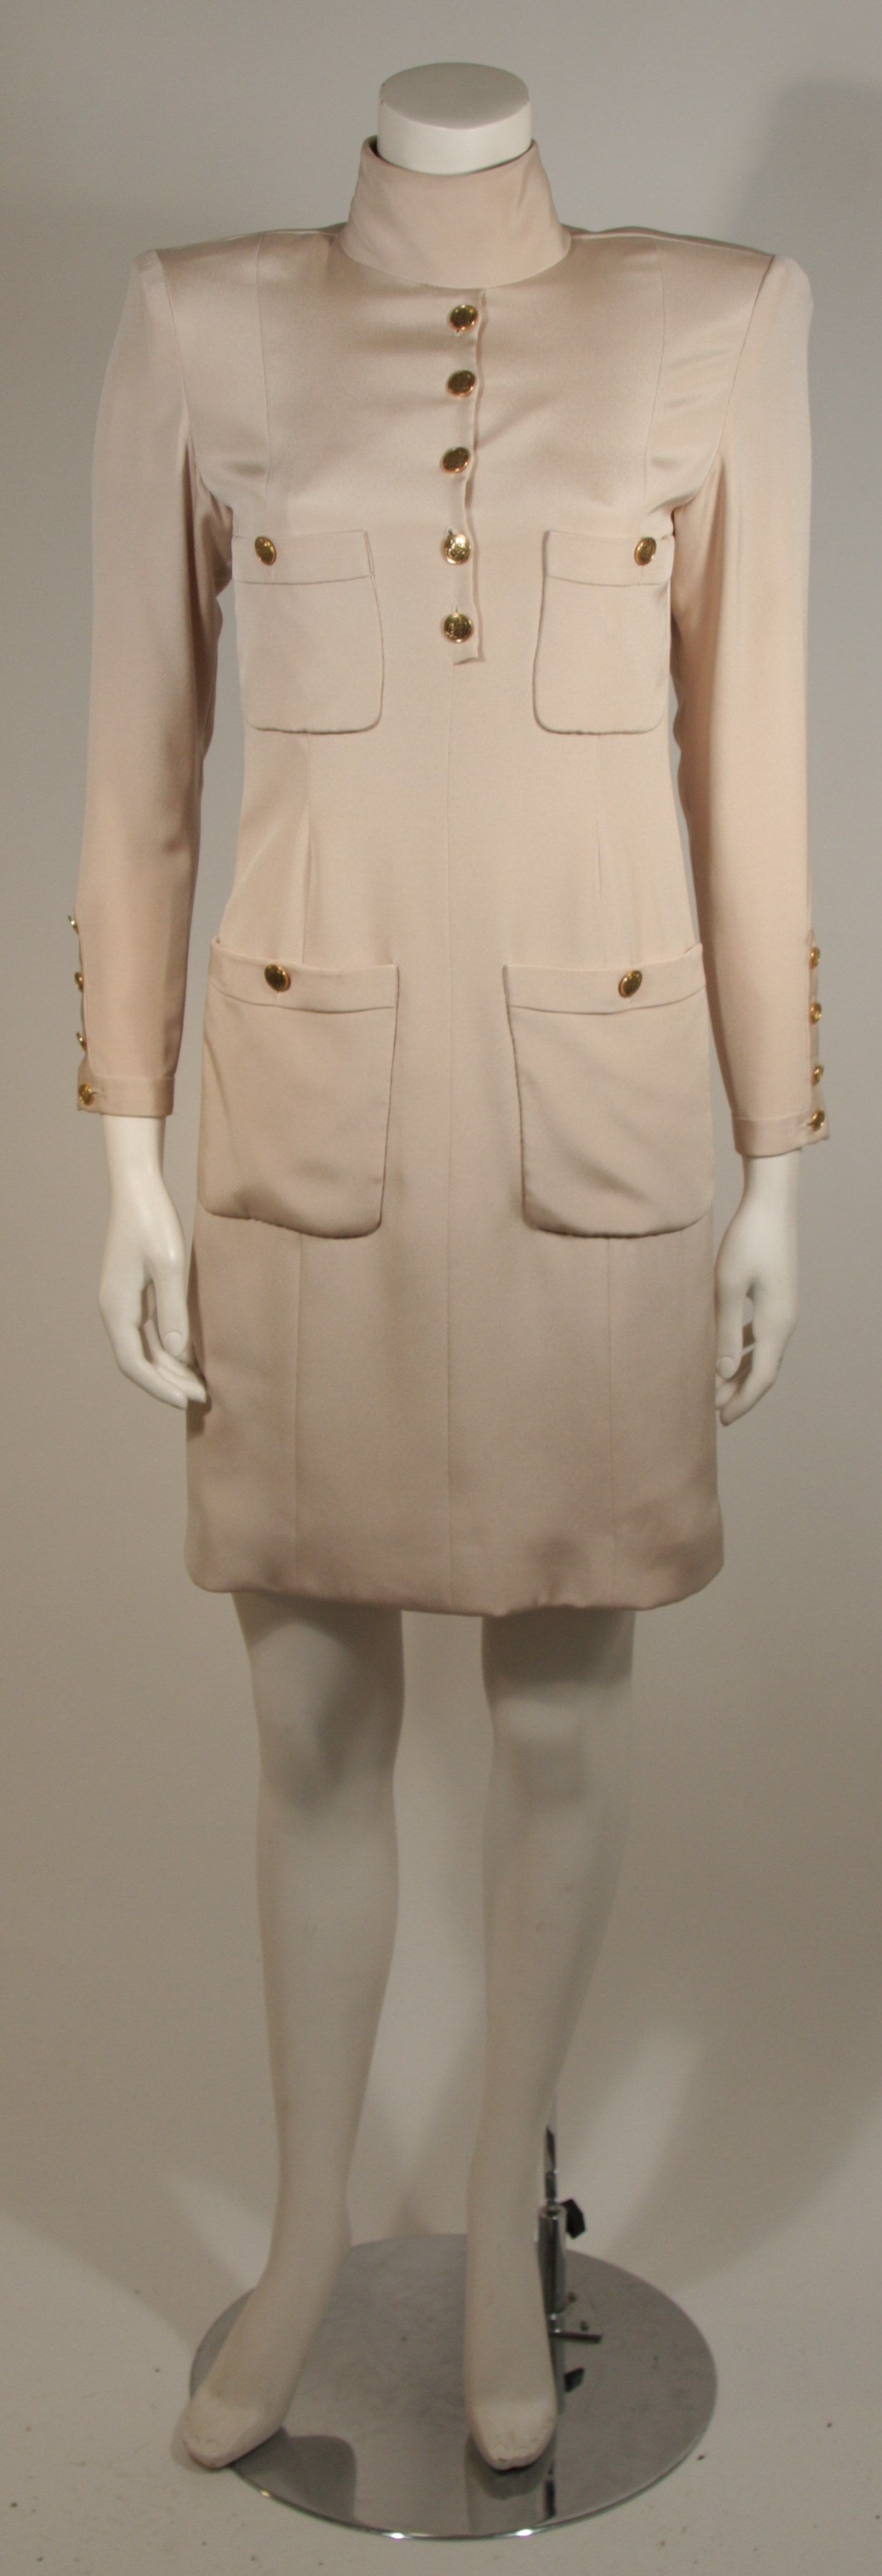 This Chanel design is available for viewing at our Beverly Hills Boutique. The dress is composed of a champagne silk and features four front pockets with gold button details. There is a center back zipper for ease of access. The item does not have a